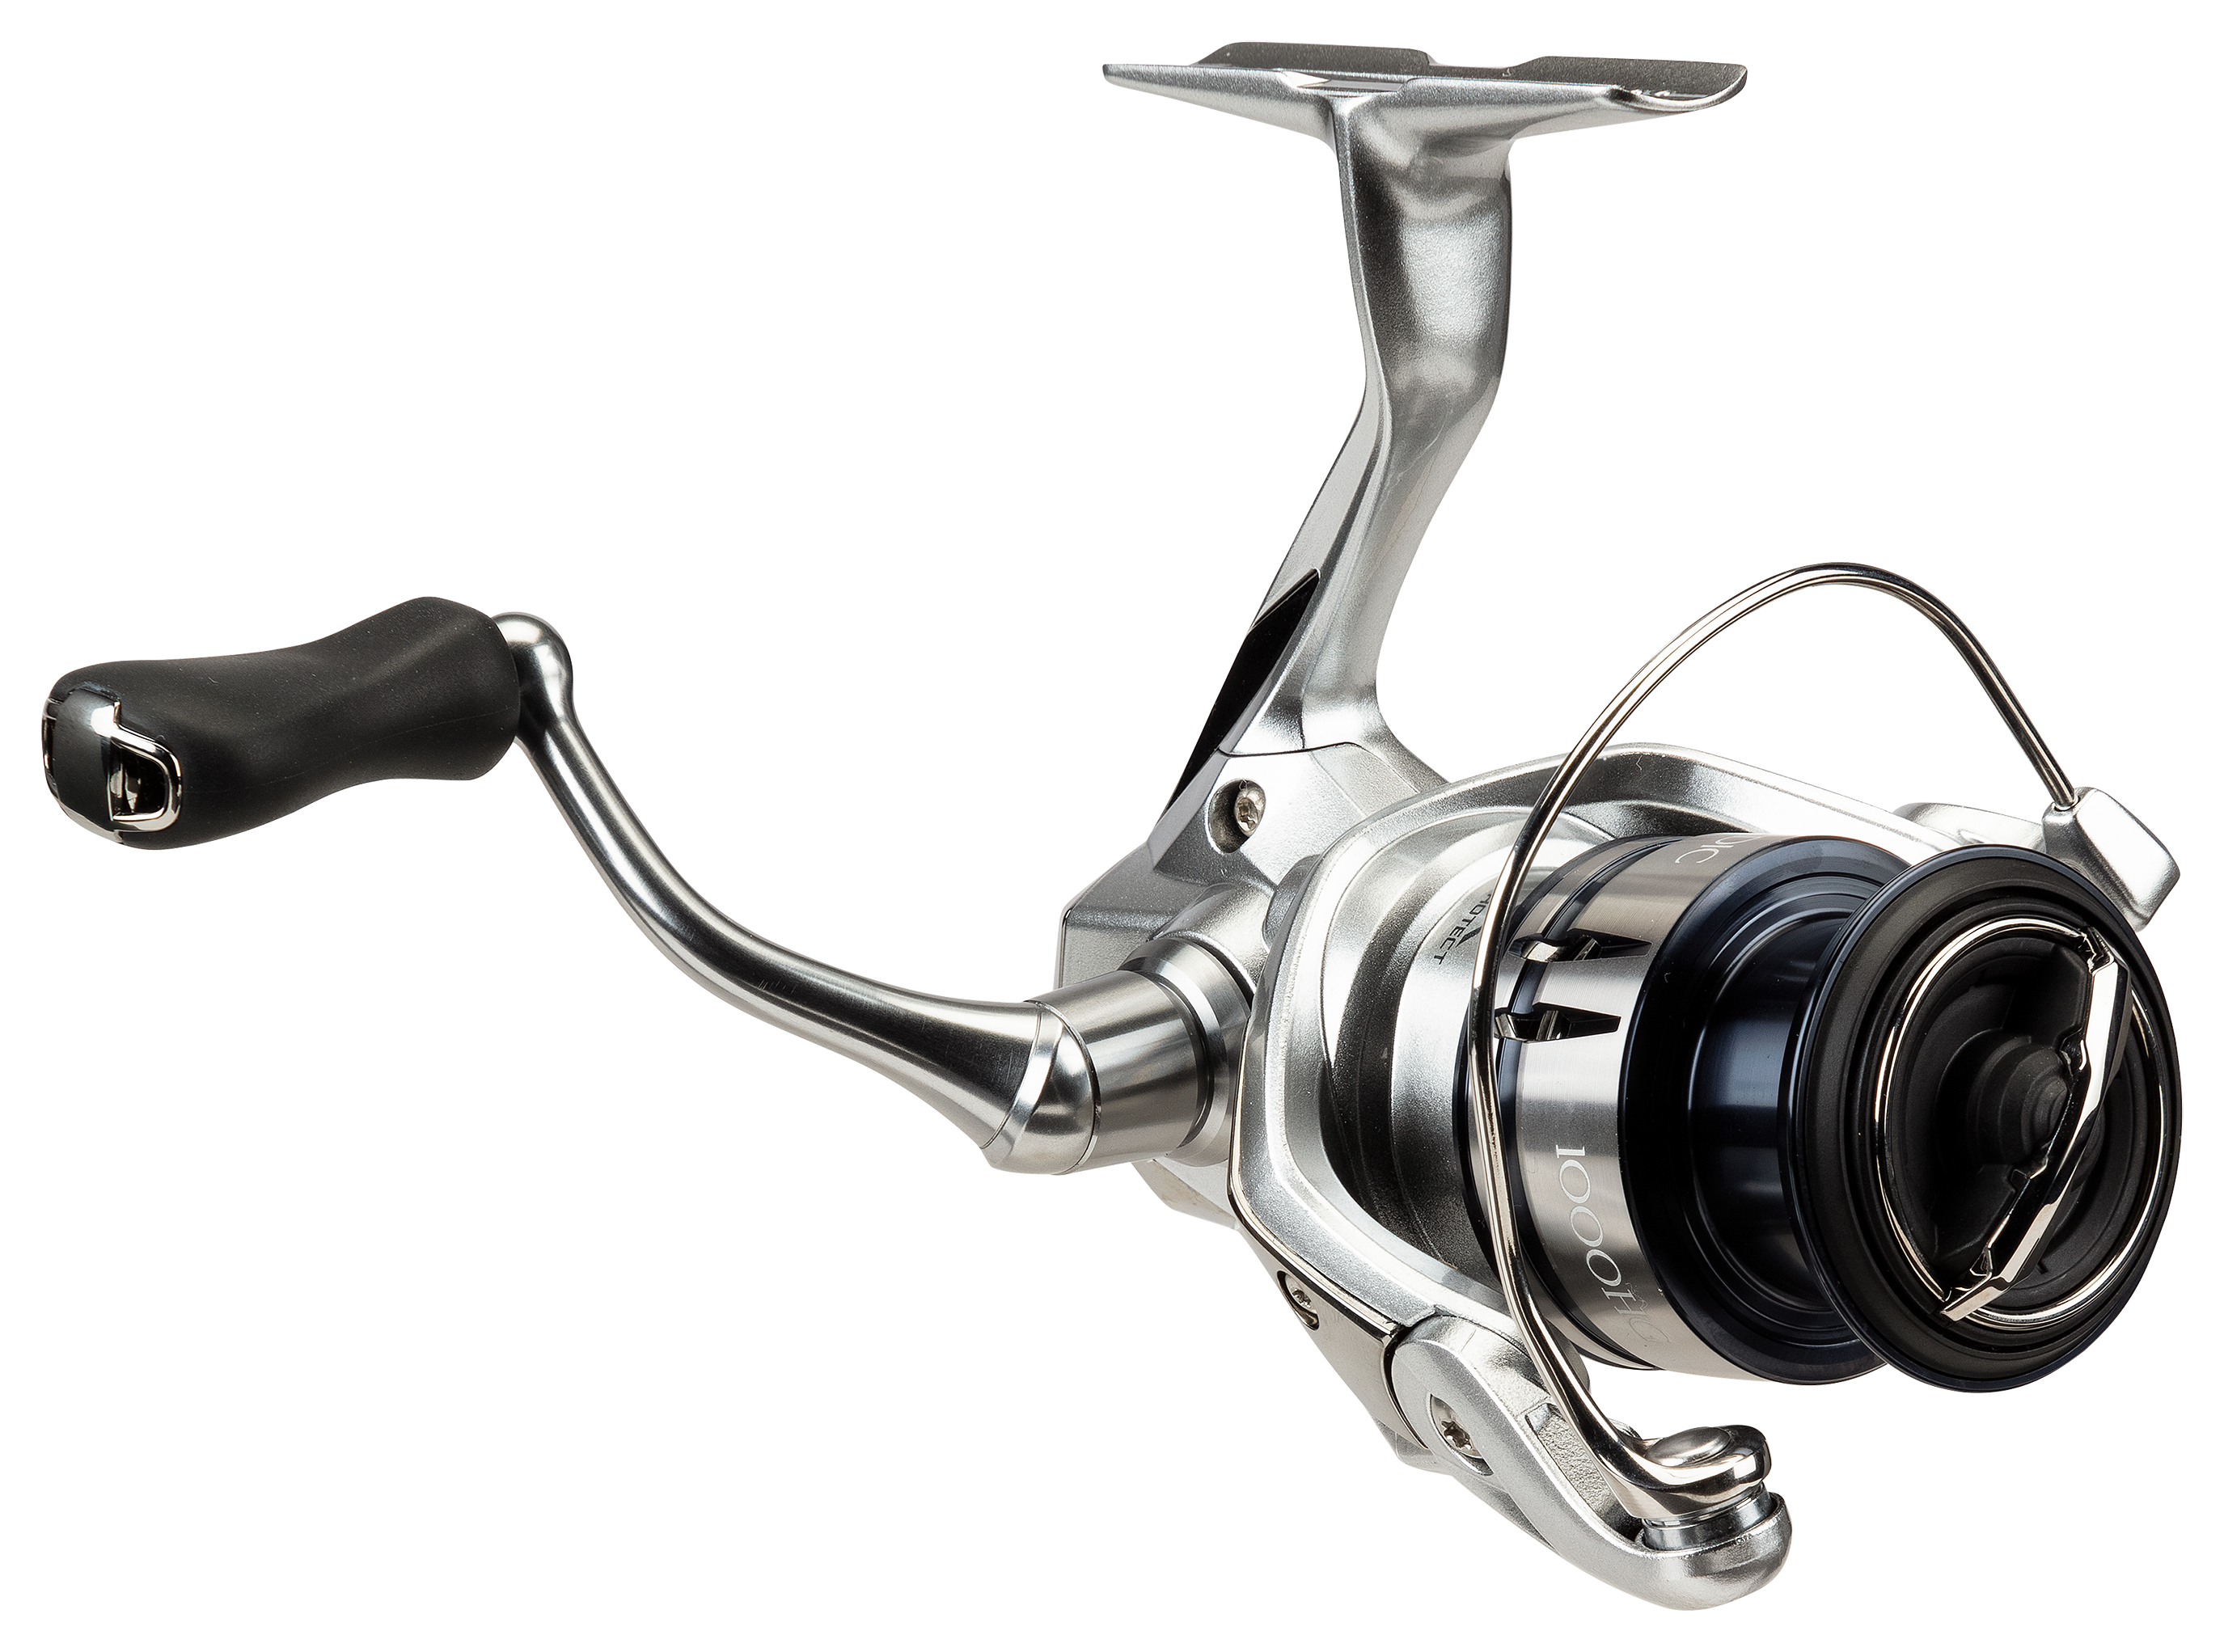 Stradic FL 2500 vs 3000 - Fishing Rods, Reels, Line, and Knots - Bass  Fishing Forums